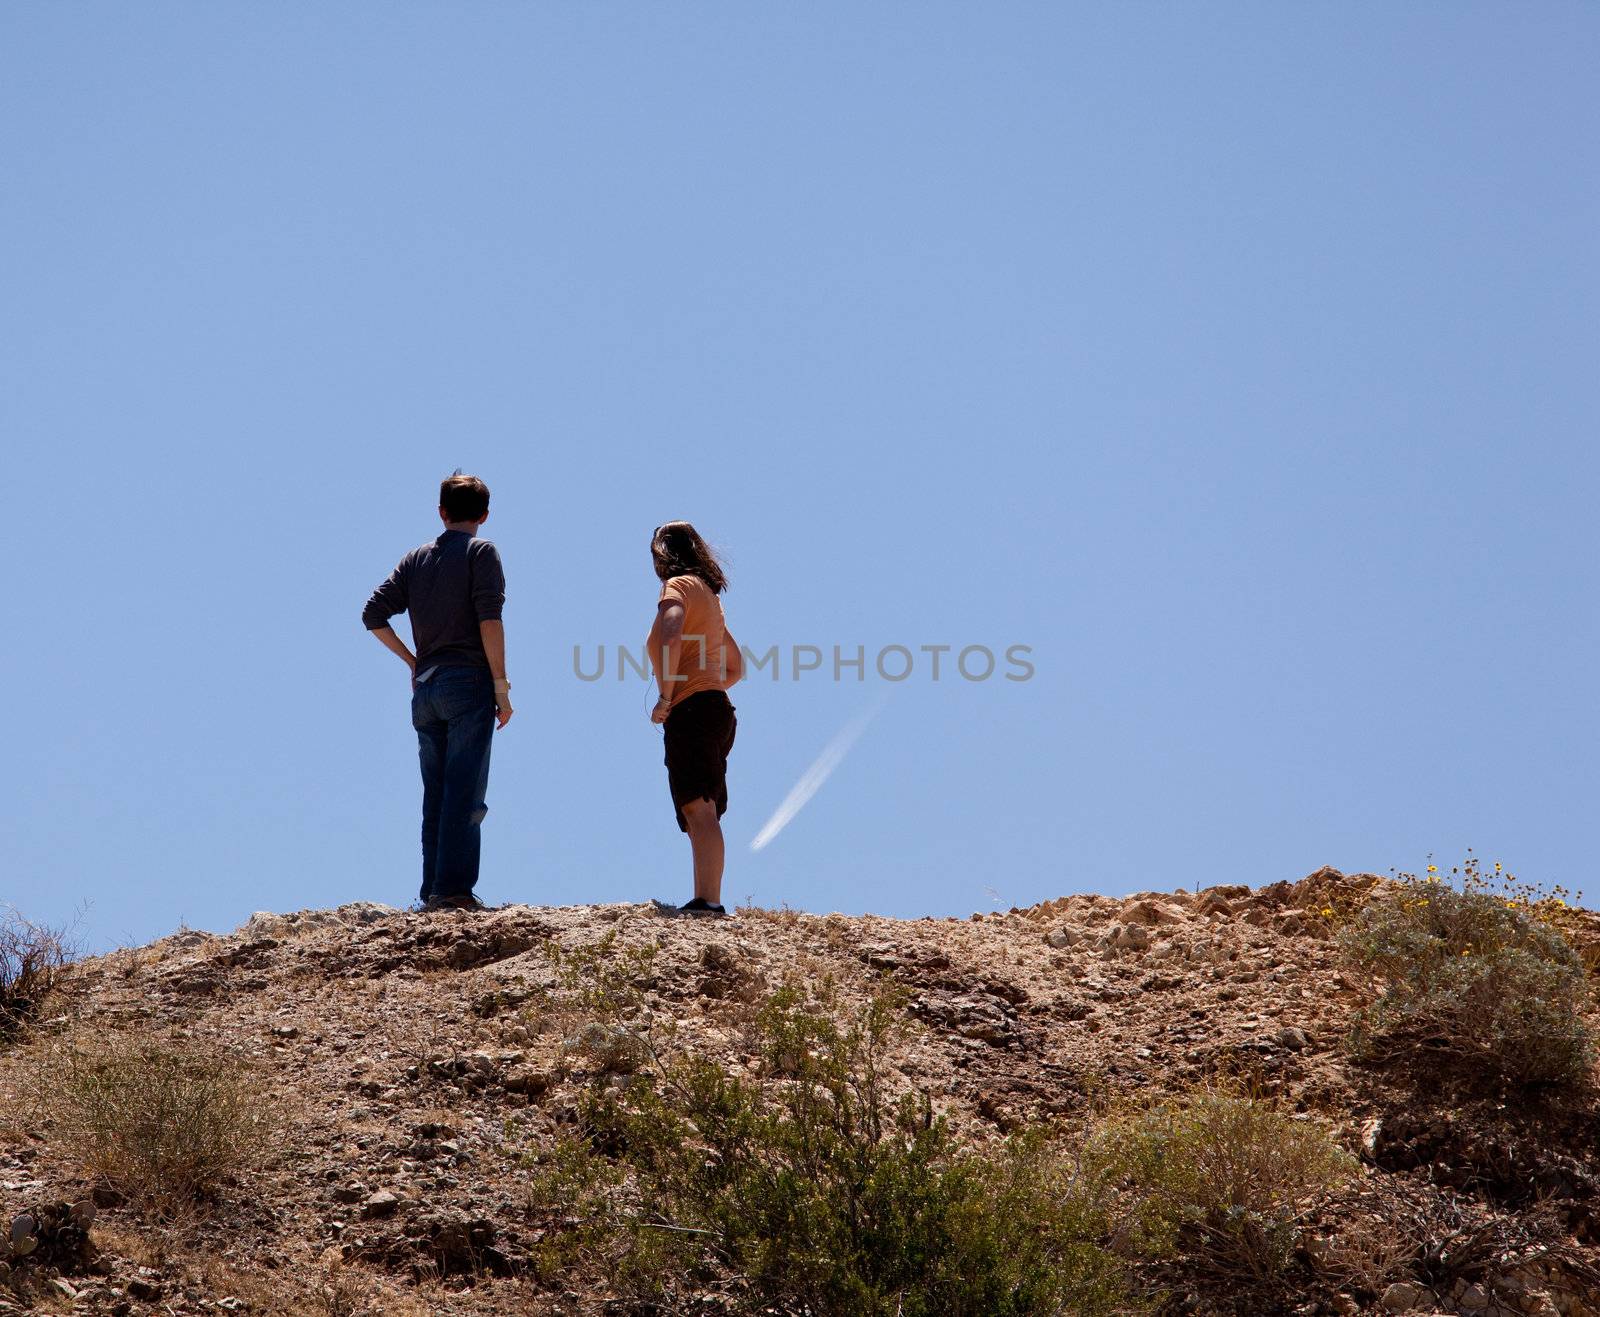 Hikers in desert point to aircraft trail by steheap